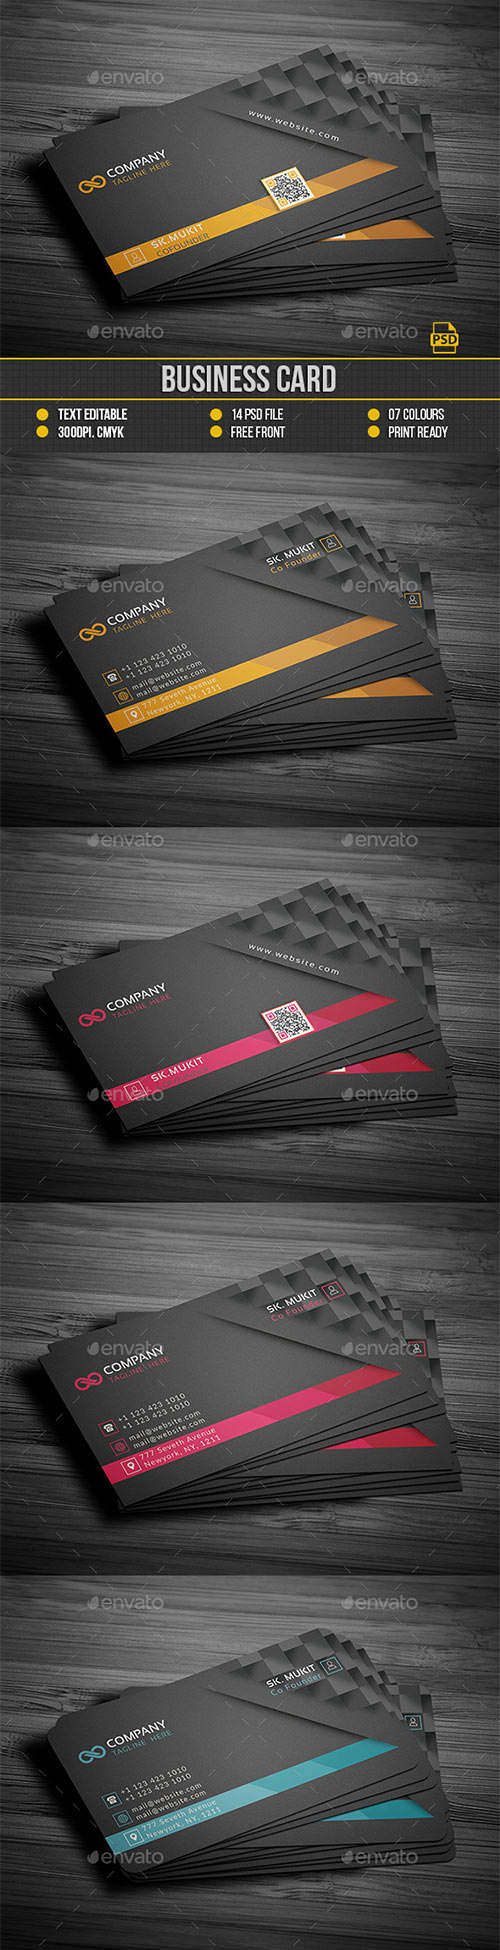 Business Card 19222978